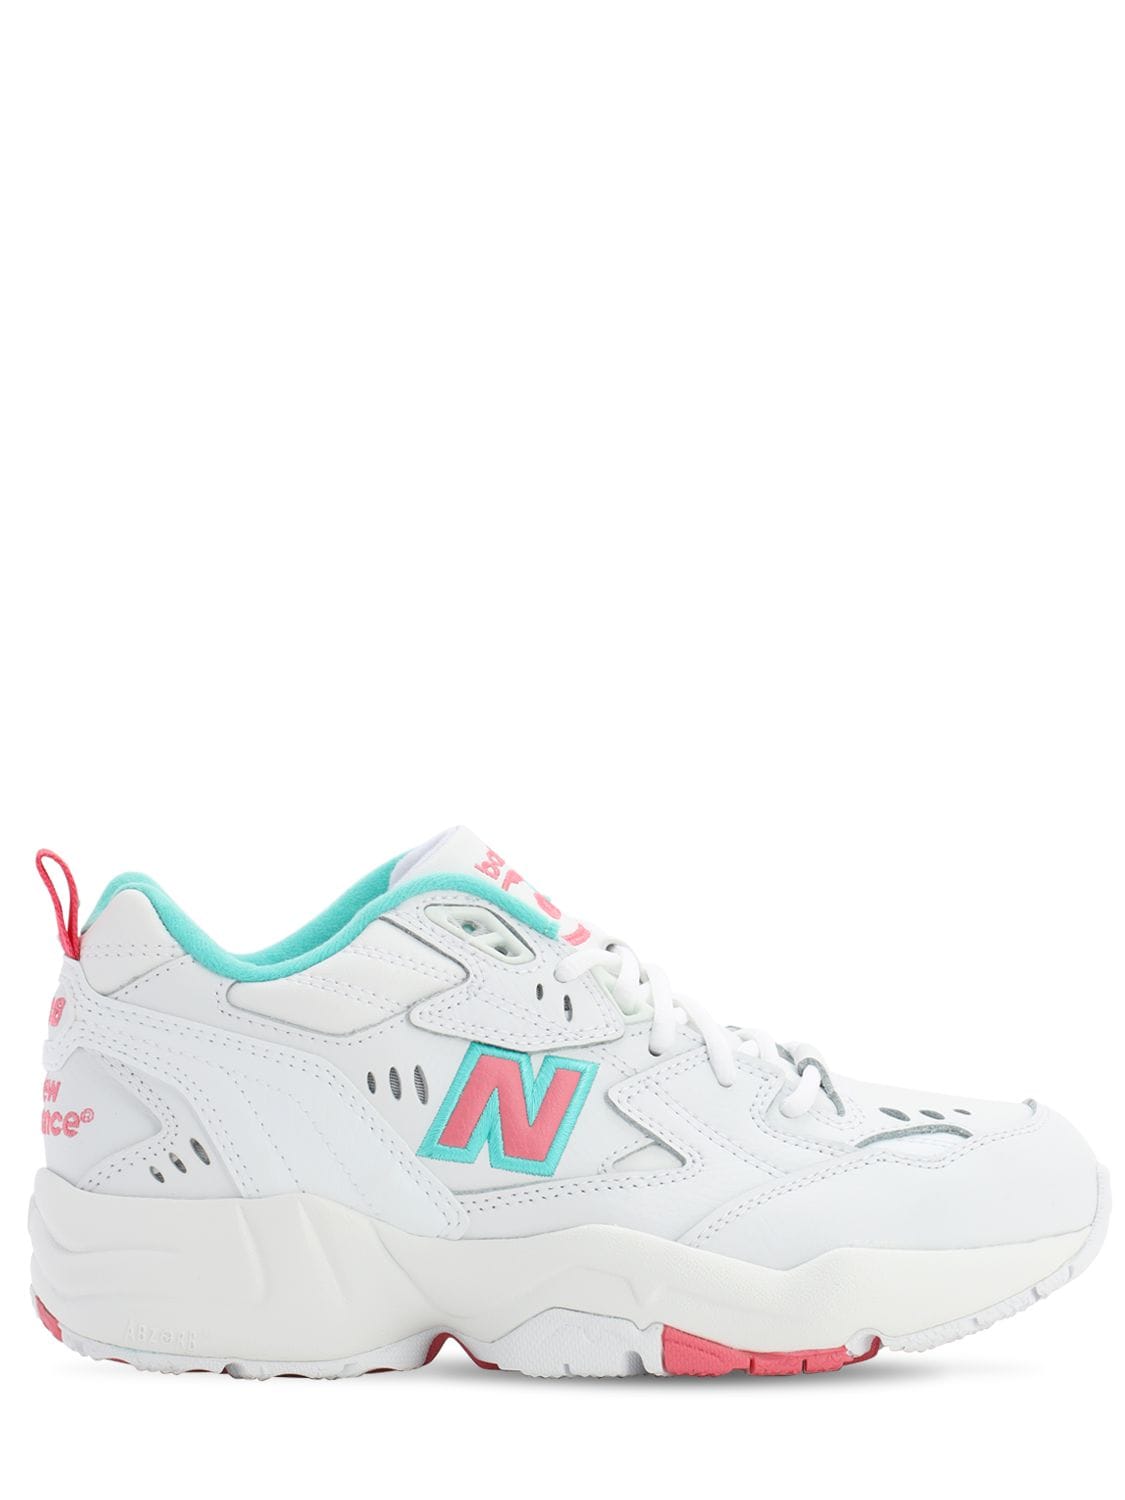 New Balance 608 White With Pink And Green Chunky Sneakers-multi In White,pink